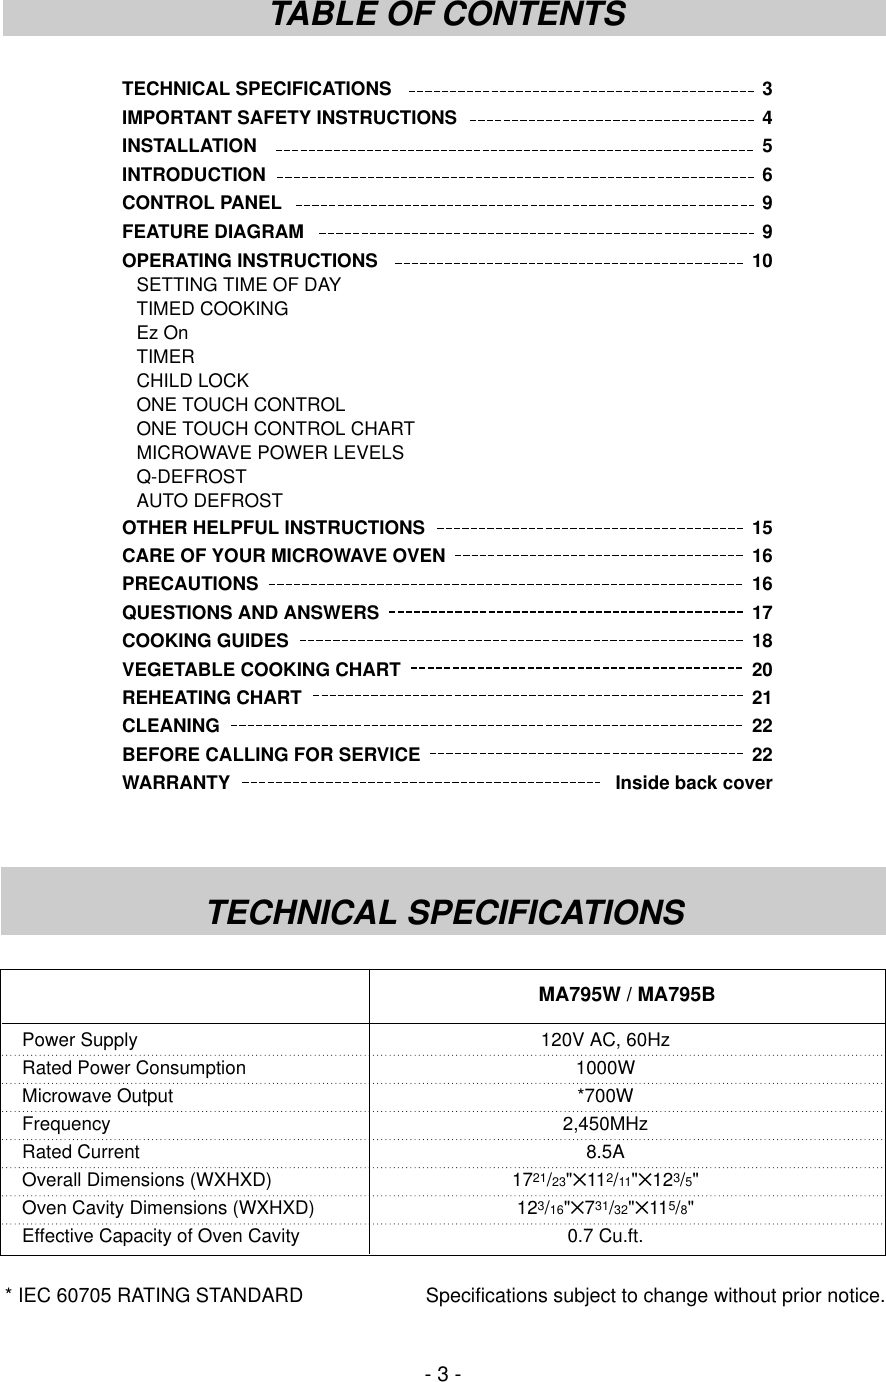 TECHNICAL SPECIFICATIONS 3IMPORTANT SAFETY INSTRUCTIONS 4INSTALLATION 5INTRODUCTION 6CONTROL PANEL 9FEATURE DIAGRAM 9OPERATING INSTRUCTIONS 10SETTING TIME OF DAYTIMED COOKINGEz OnTIMERCHILD LOCKONE TOUCH CONTROLONE TOUCH CONTROL CHARTMICROWAVE POWER LEVELSQ-DEFROSTAUTO DEFROSTOTHER HELPFUL INSTRUCTIONS 15CARE OF YOUR MICROWAVE OVEN 16PRECAUTIONS 16QUESTIONS AND ANSWERS 17COOKING GUIDES 18VEGETABLE COOKING CHART 20REHEATING CHART 21CLEANING 22BEFORE CALLING FOR SERVICE 22WARRANTY  Inside back cover- 3 -TABLE OF CONTENTSTECHNICAL SPECIFICATIONS* IEC 60705 RATING STANDARD Specifications subject to change without prior notice.Power Supply 120V AC, 60HzRated Power Consumption 1000WMicrowave Output *700WFrequency 2,450MHzRated Current 8.5AOverall Dimensions (WXHXD) 1721/23&quot;✕112/11&quot;✕123/5&quot;Oven Cavity Dimensions (WXHXD) 123/16&quot;✕731/32&quot;✕115/8&quot;Effective Capacity of Oven Cavity 0.7 Cu.ft.MA795W / MA795B